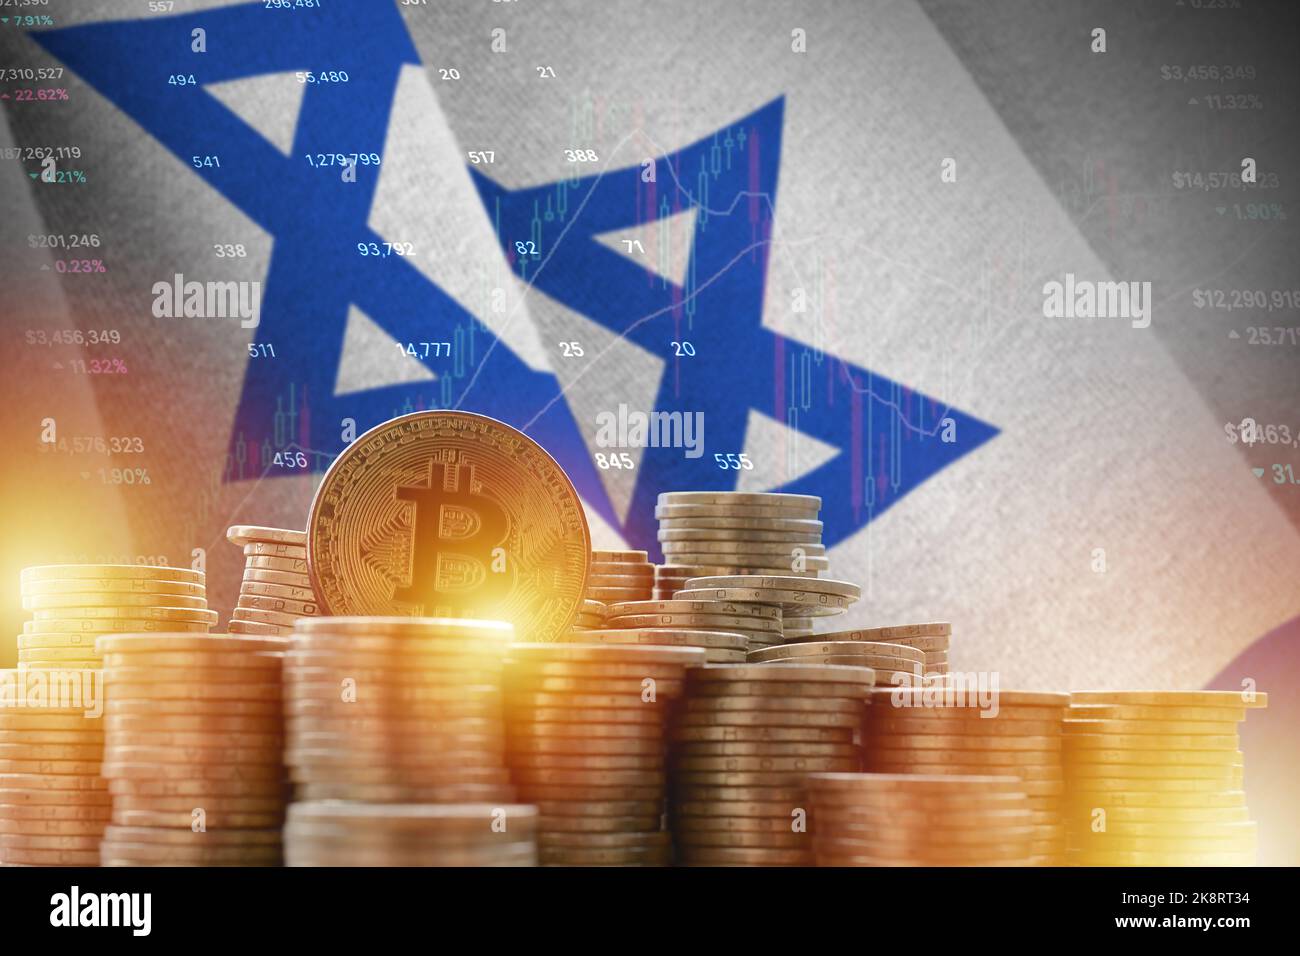 Israel flag and big amount of golden bitcoin coins and trading platform chart. Crypto currency concept Stock Photo